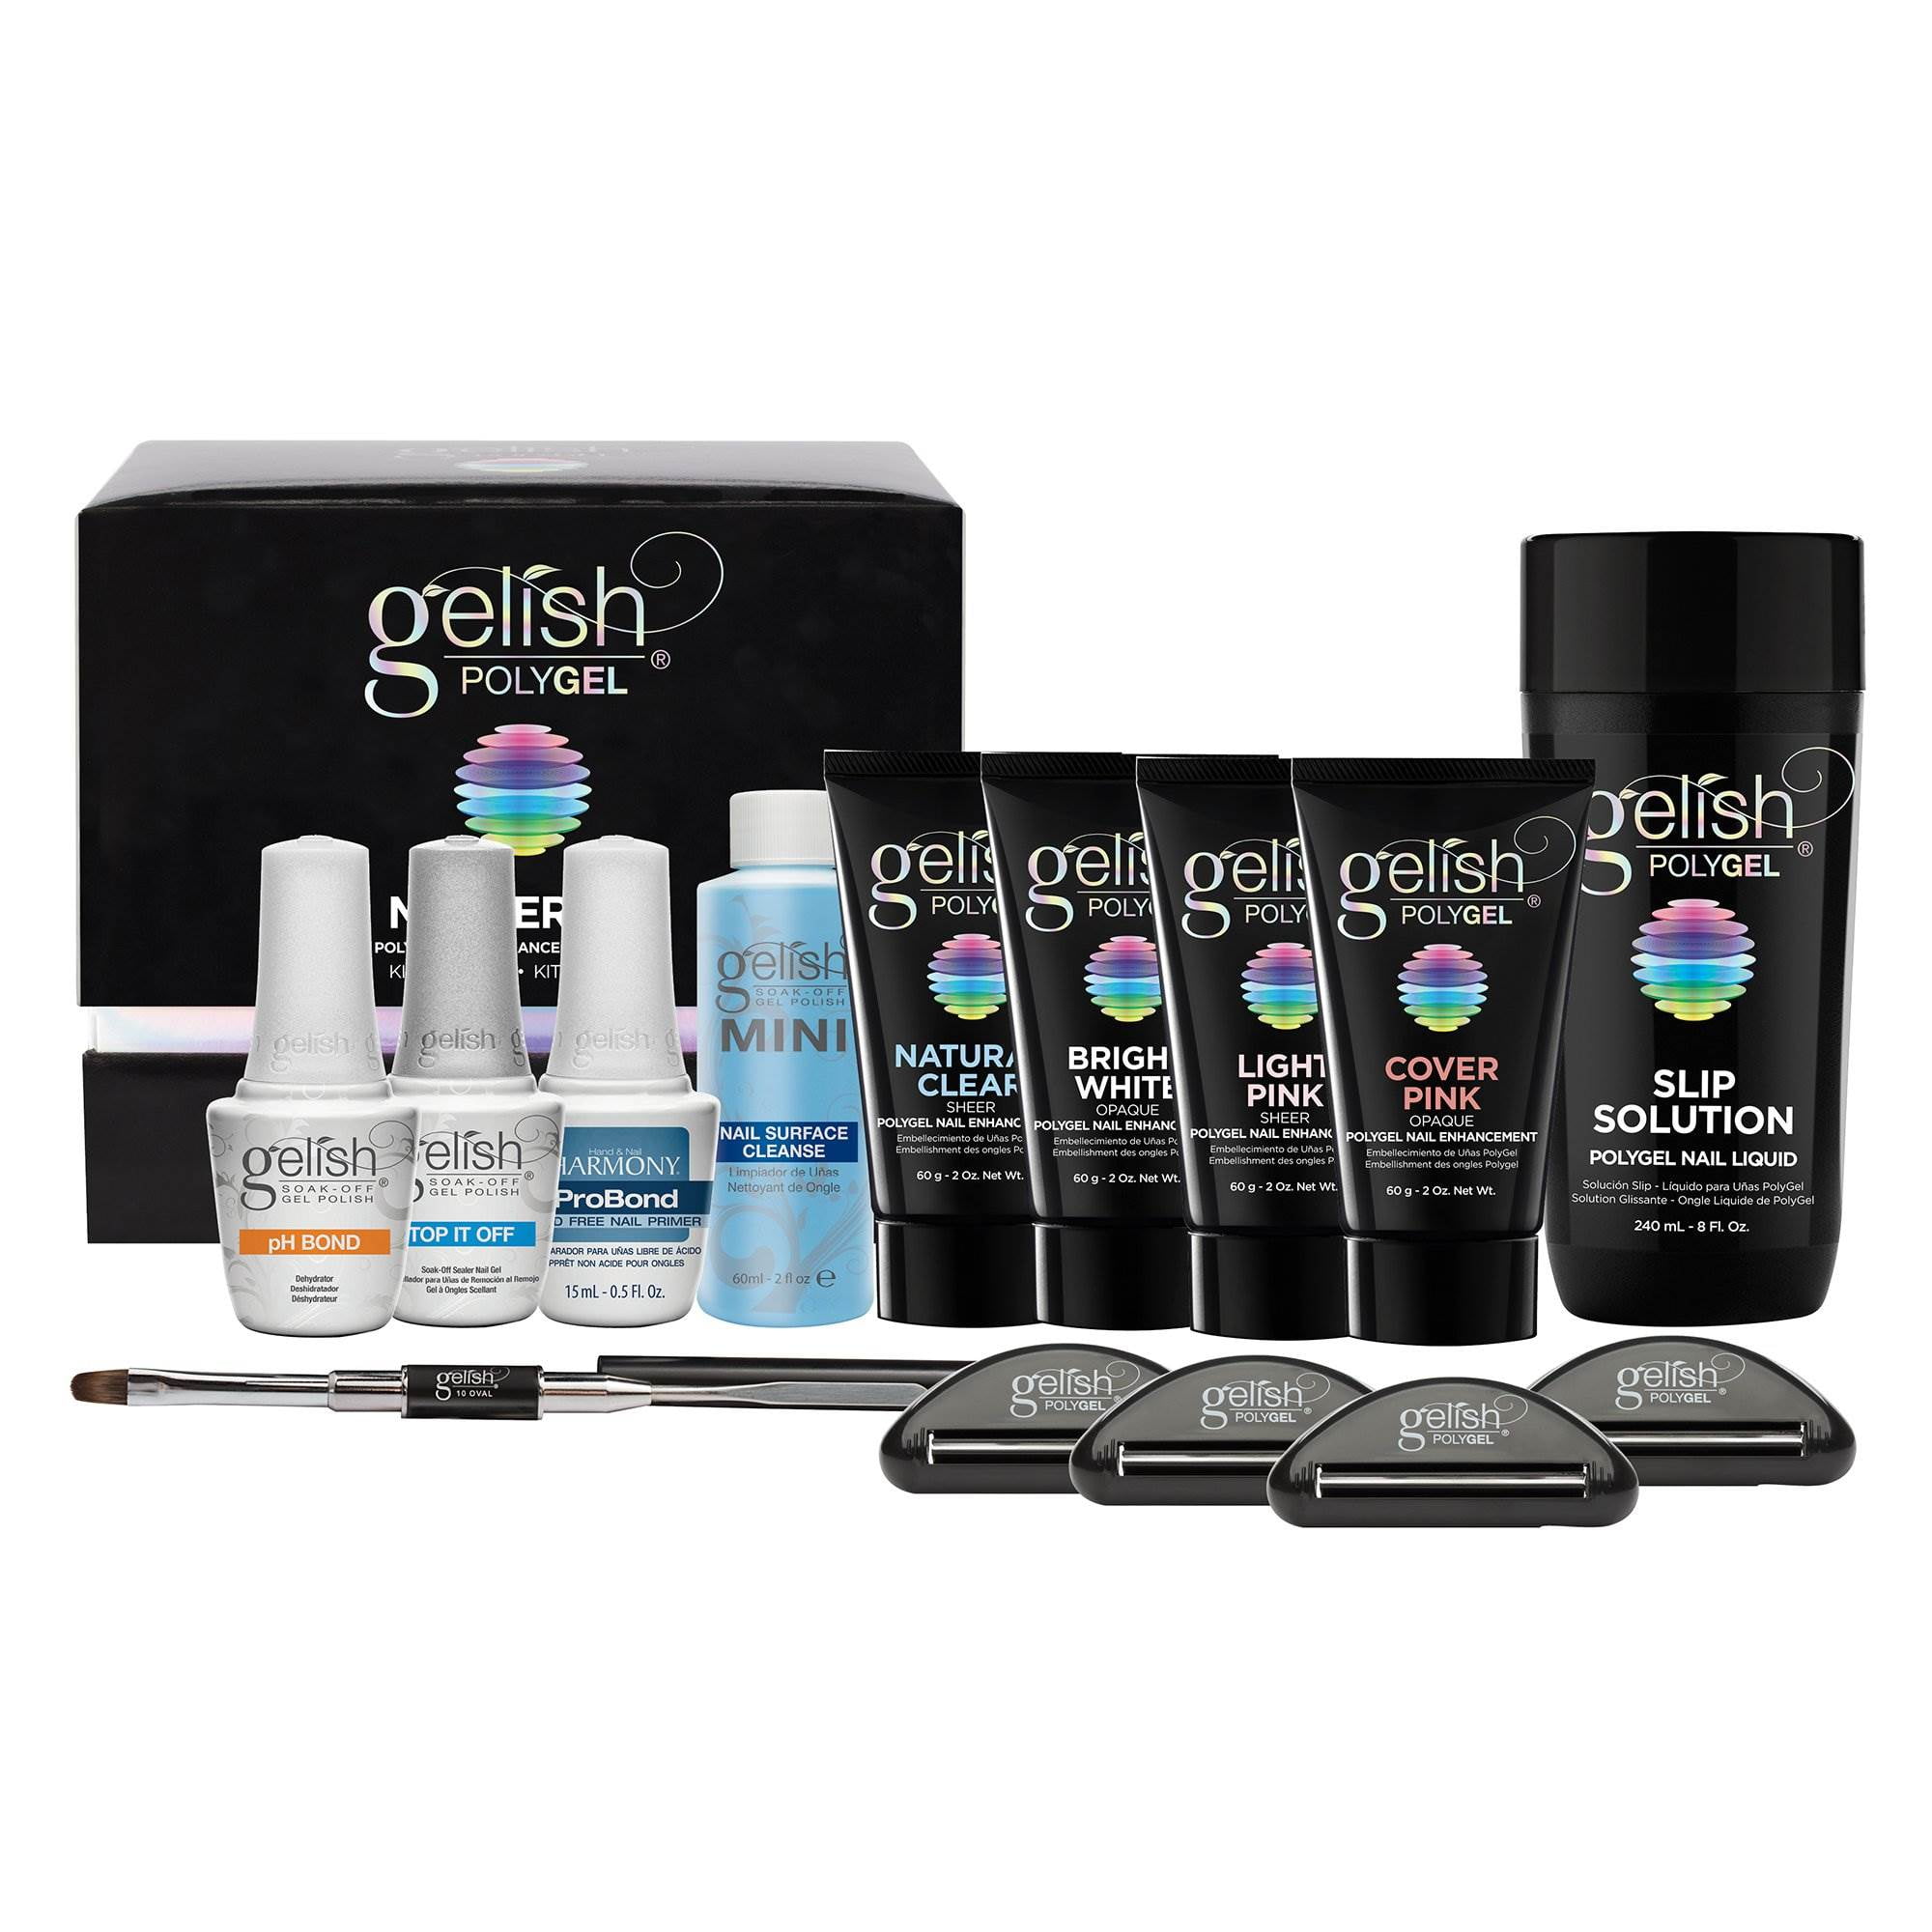 Polygel Kit with UV Lamp and Slip Solution – Astound Beauty